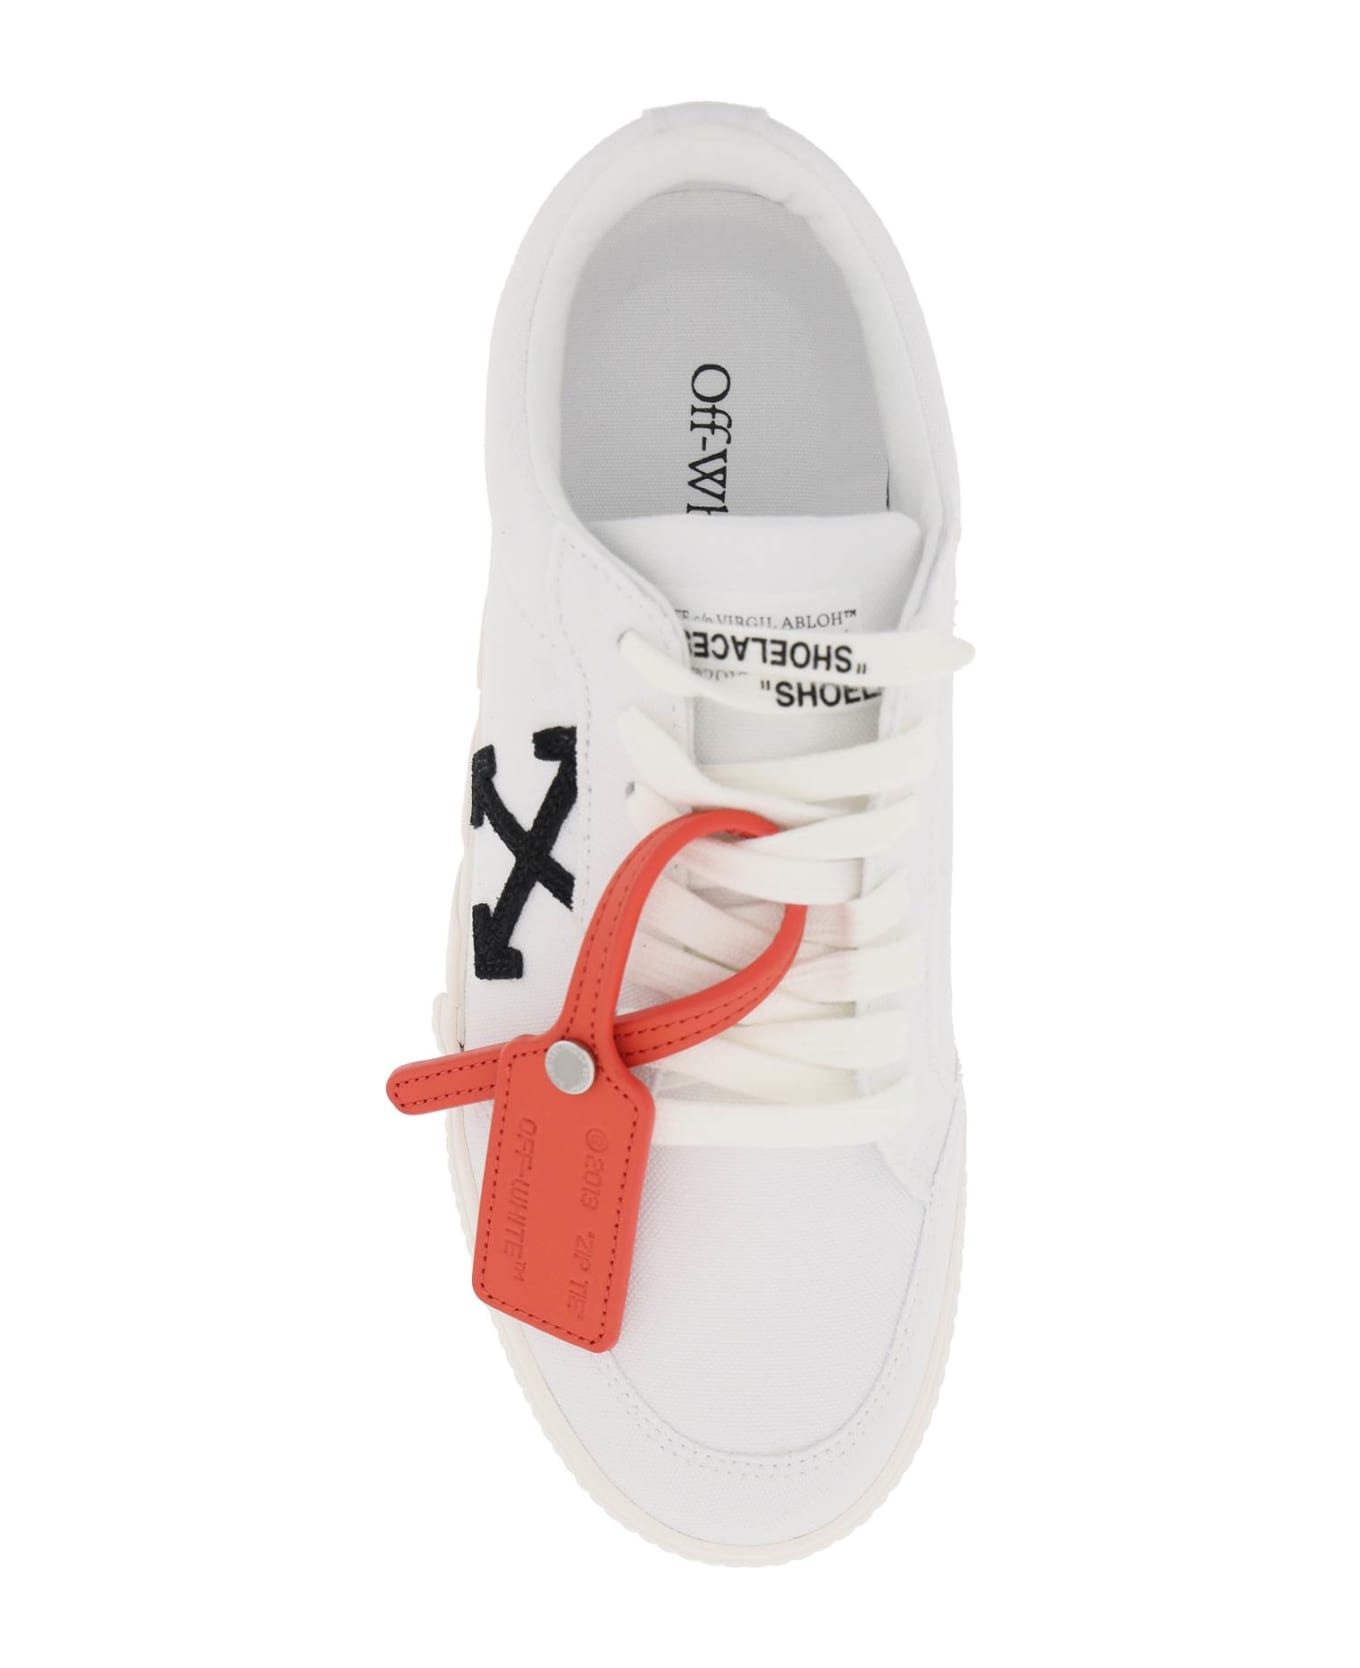 Off-White Vulcanized Fabric Low-top Sneakers - White